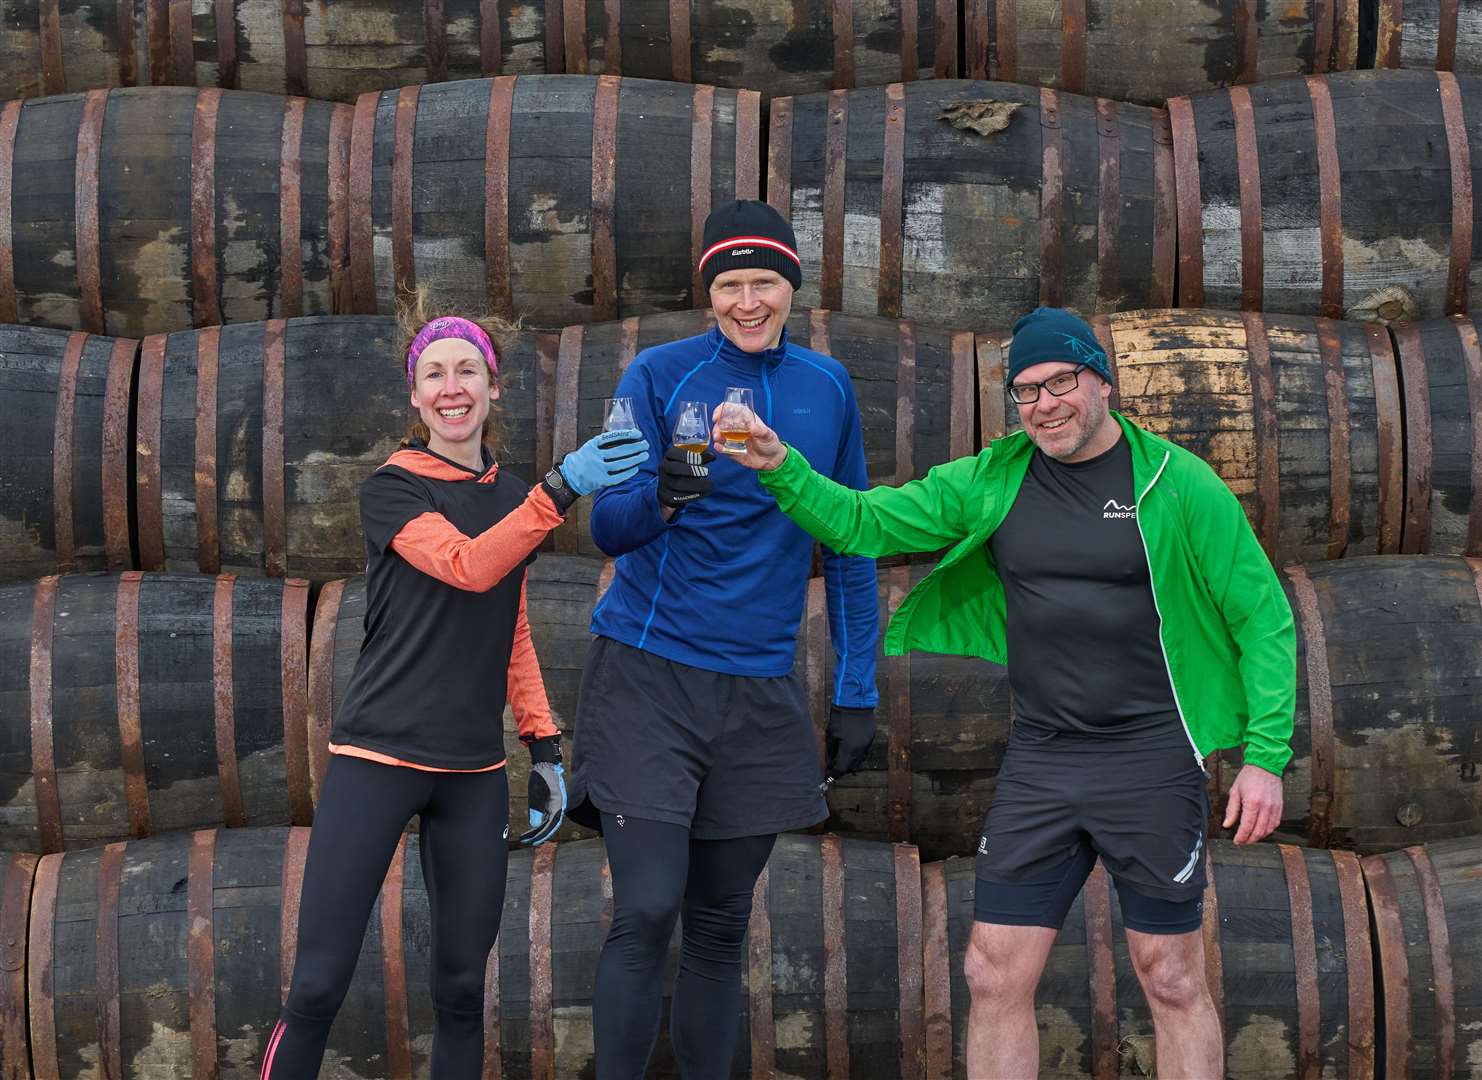 Toasting the launch of the 2020 Spirit of Speyside Whisky festival are Run Speyside's (from left) Jenny Gilles, Eric Gilles and Tom Broadbent.